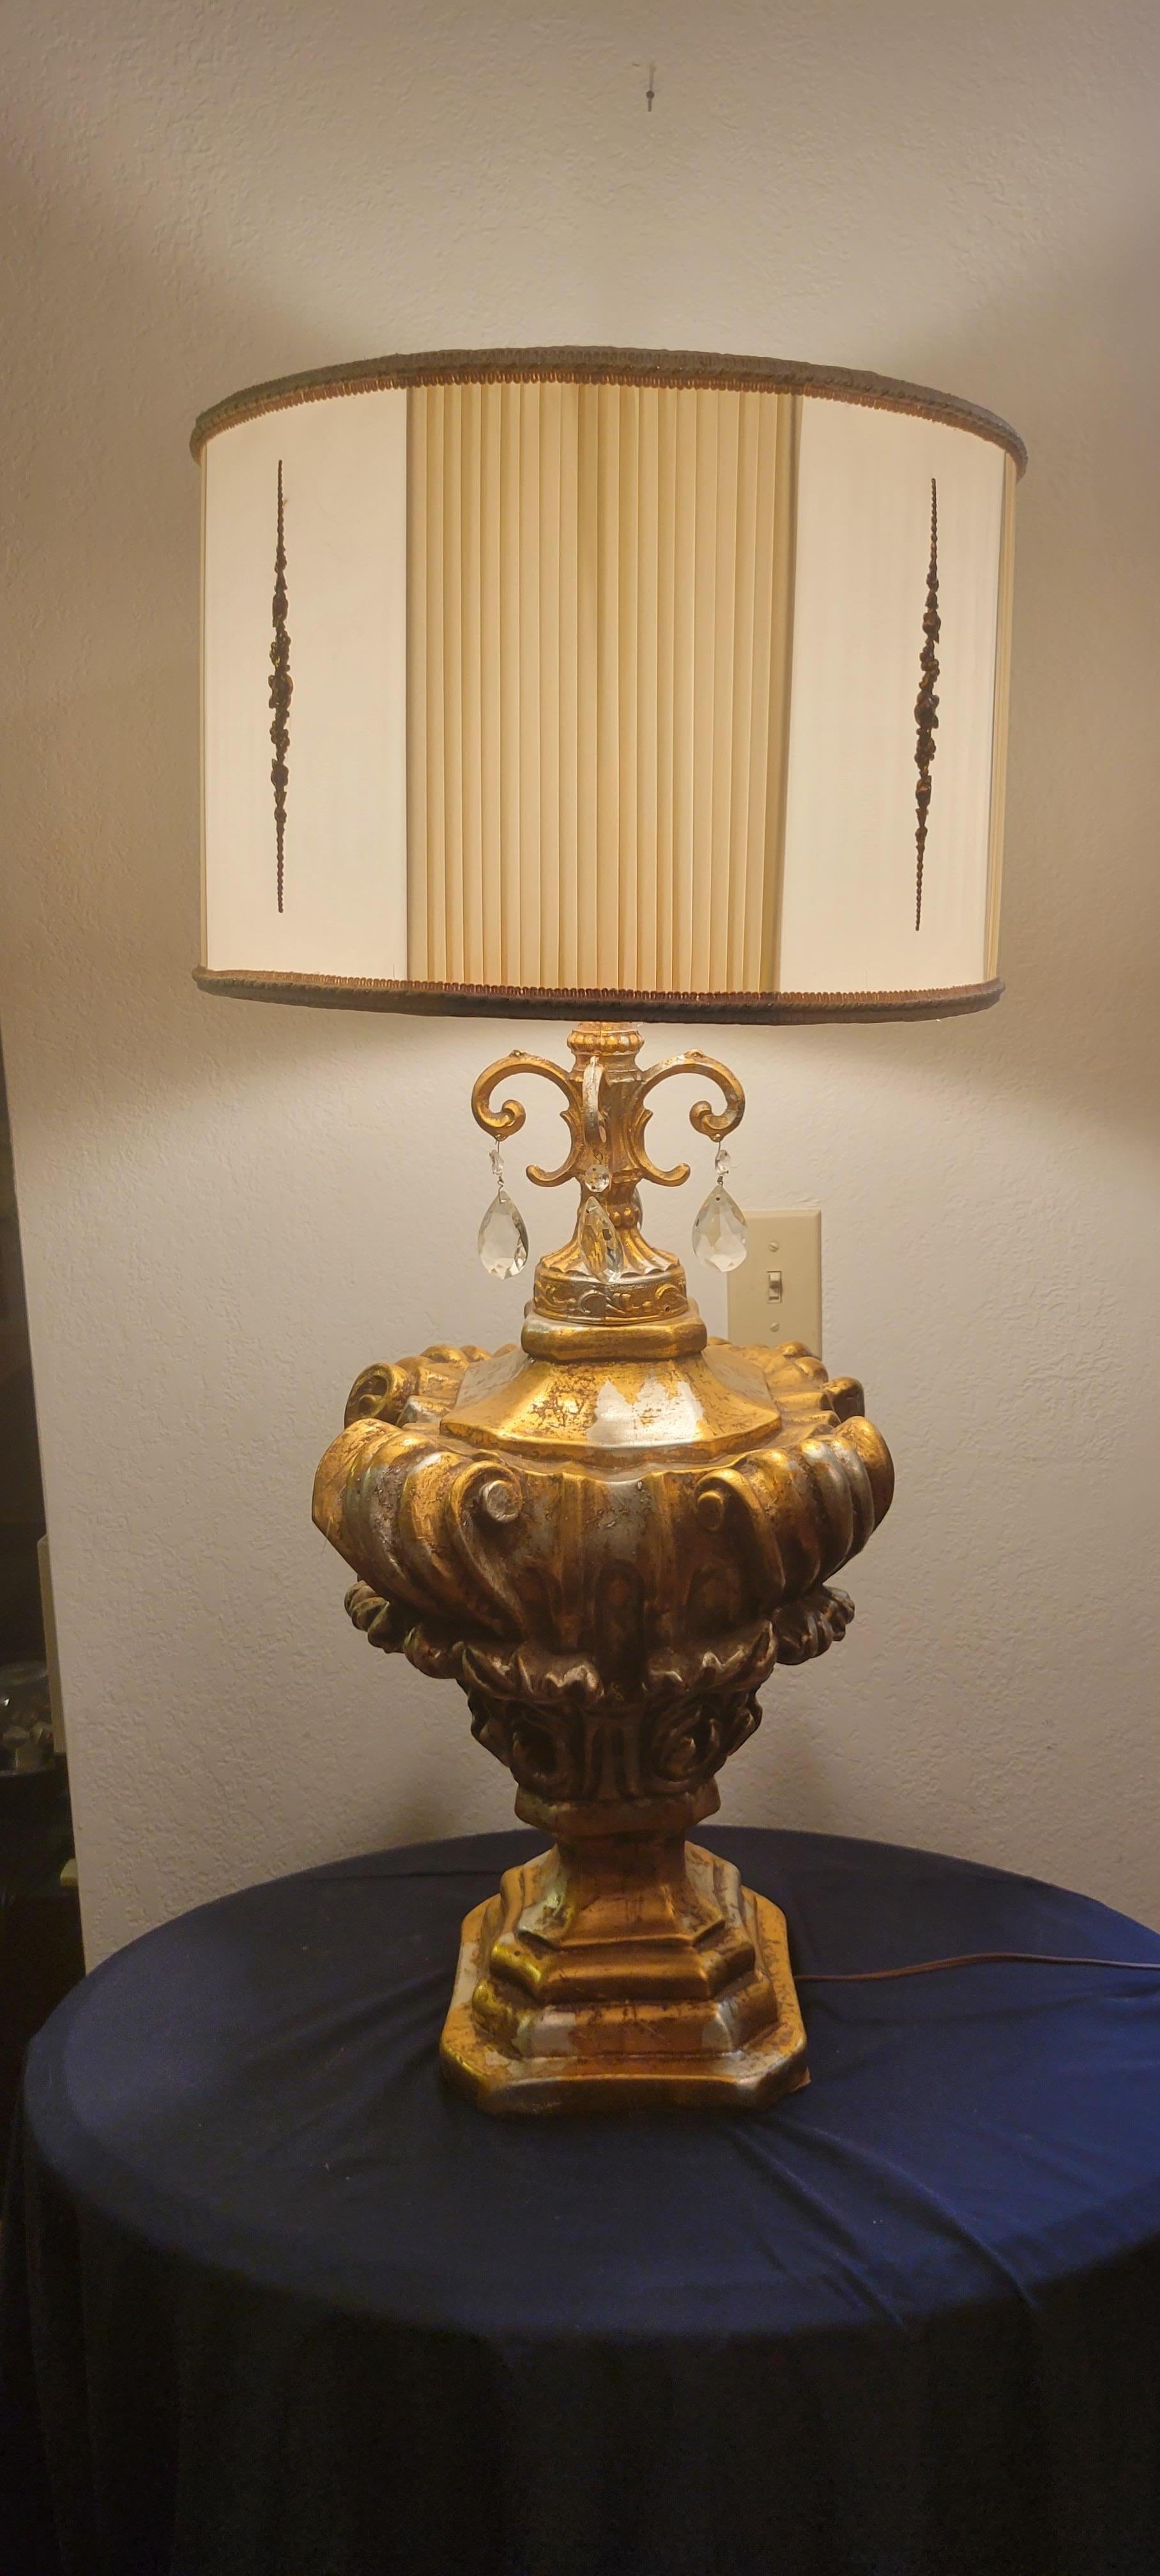 This Mid-Century-Modern Hollywood Regency parlor lamp is about 36 inch high. The metal base has an antiqued gold finish and measures 9